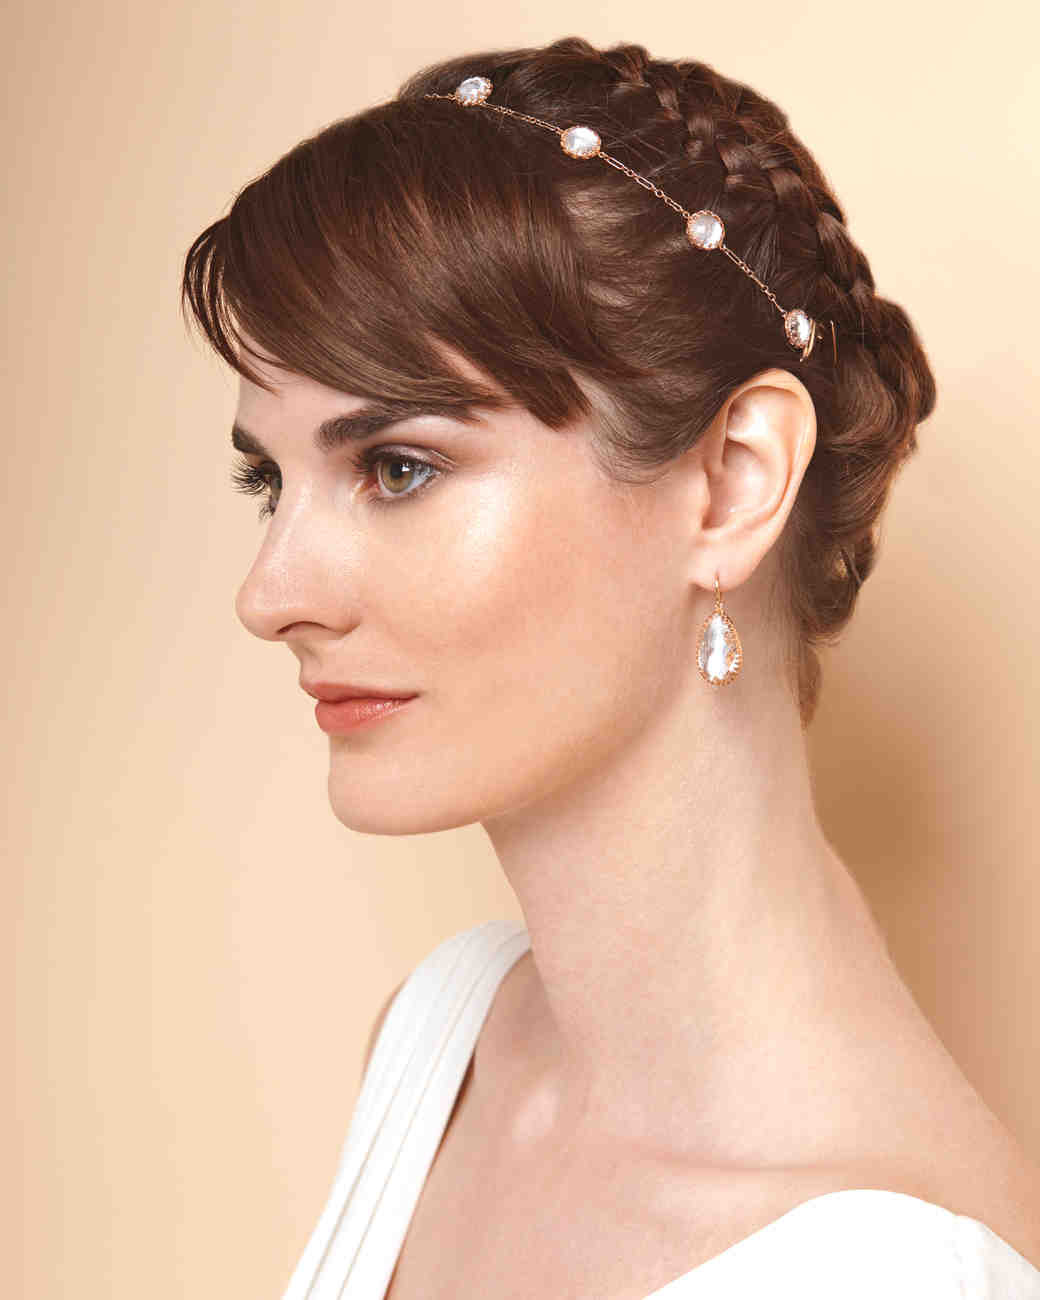 Short Hairstyles For Wedding Day
 4 Ways to Wear a Short Hairstyle on Your Wedding Day